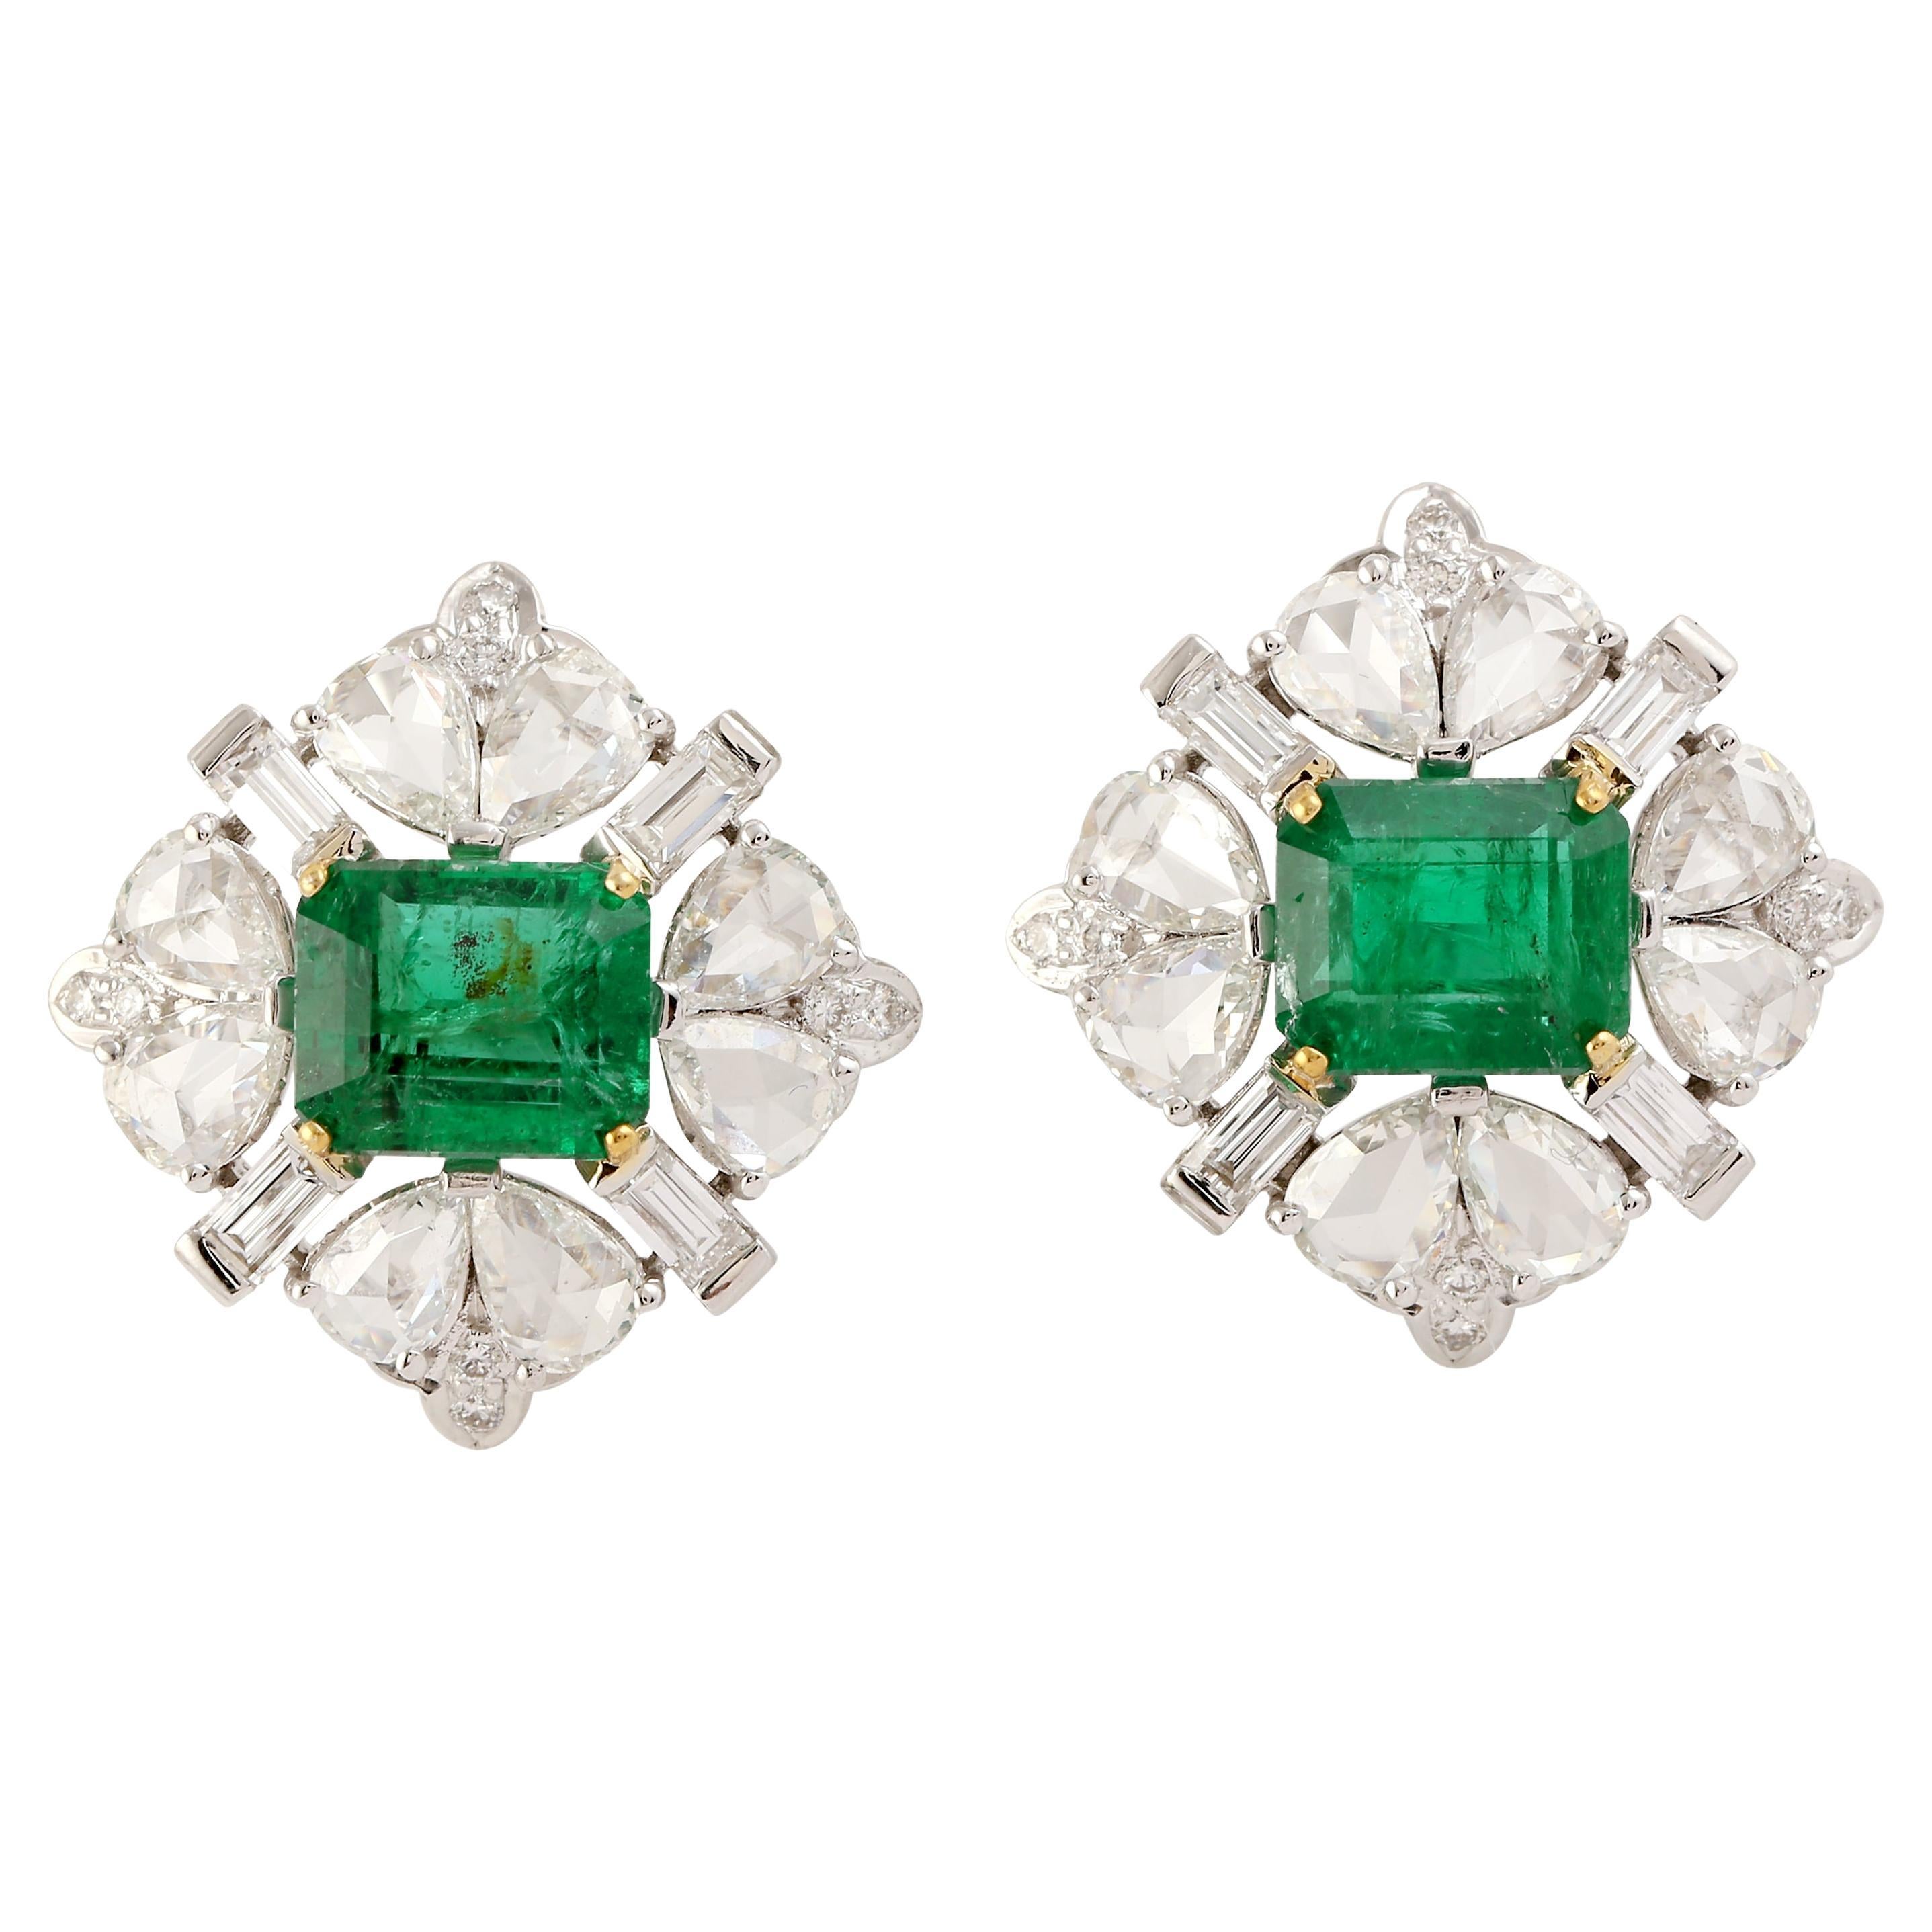 Designer Rosecut Diamond and Emerald stud in 18K White Gold is lovely and can be worn form day to night.

18KT: 7.782gms
Diamond:3.86cts
Emerald: 4.48cts